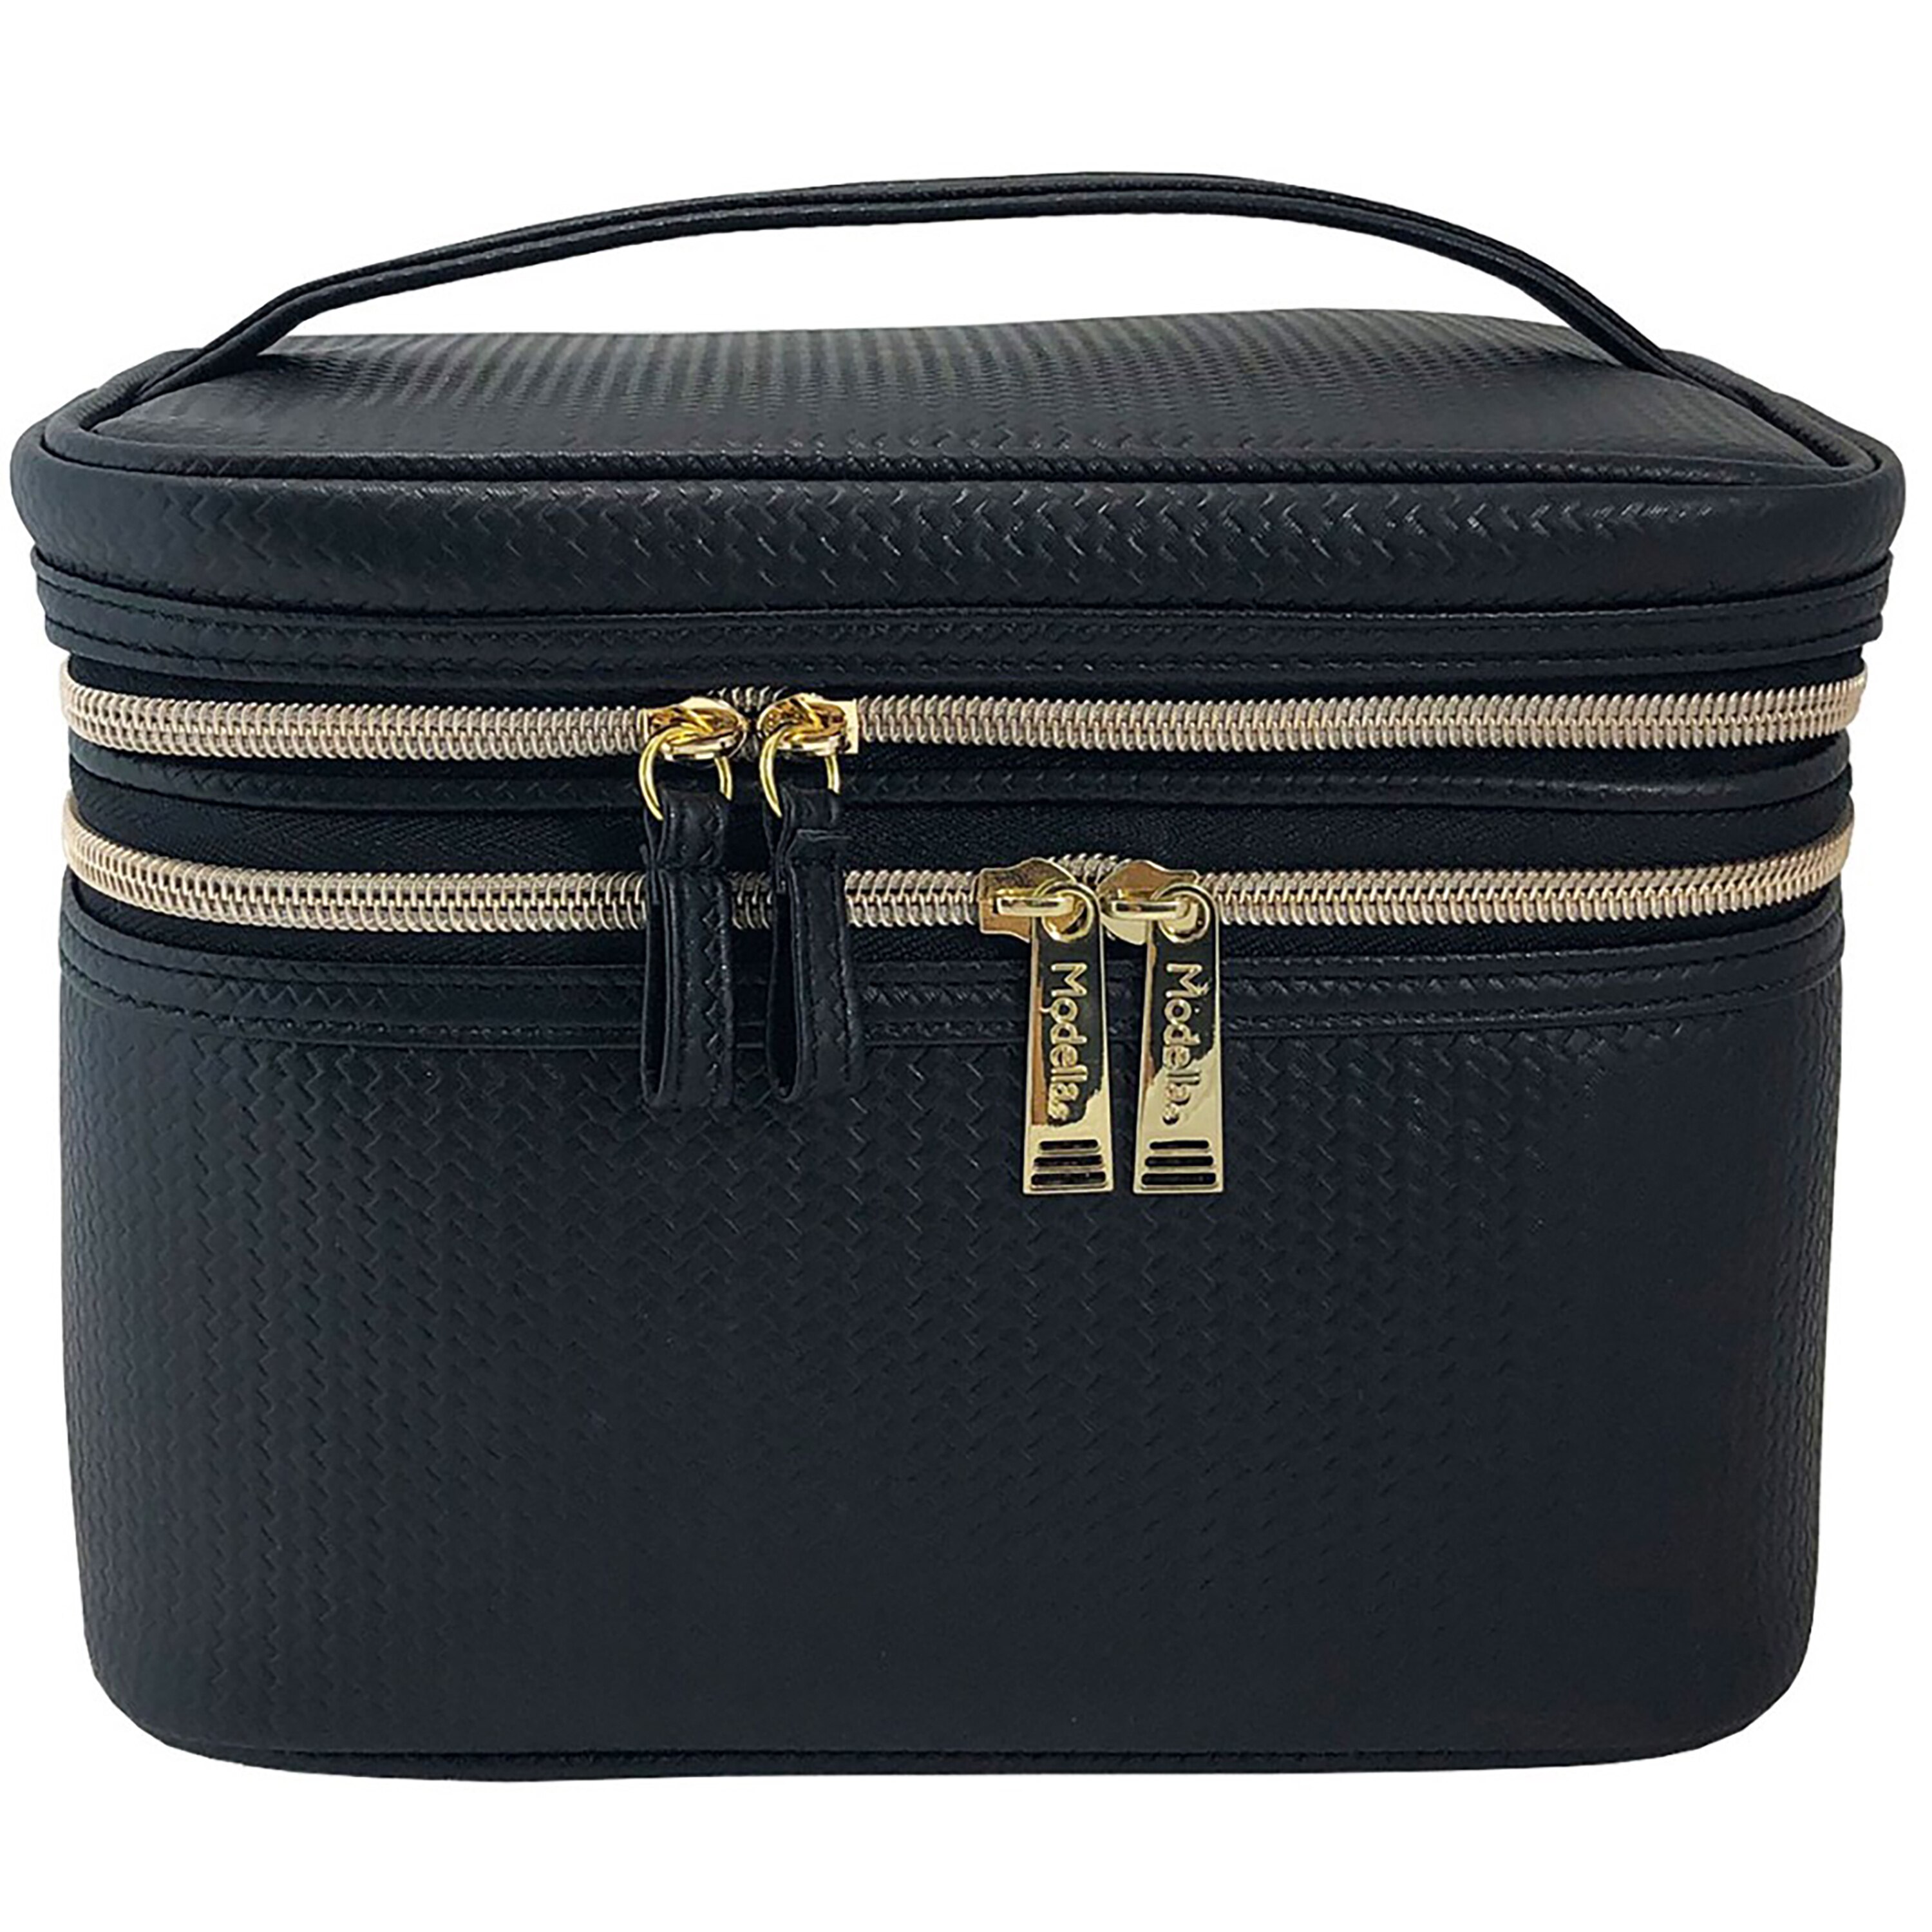 Modella Basketweave 5 Piece Train Case | Pick Up In Store TODAY at CVS